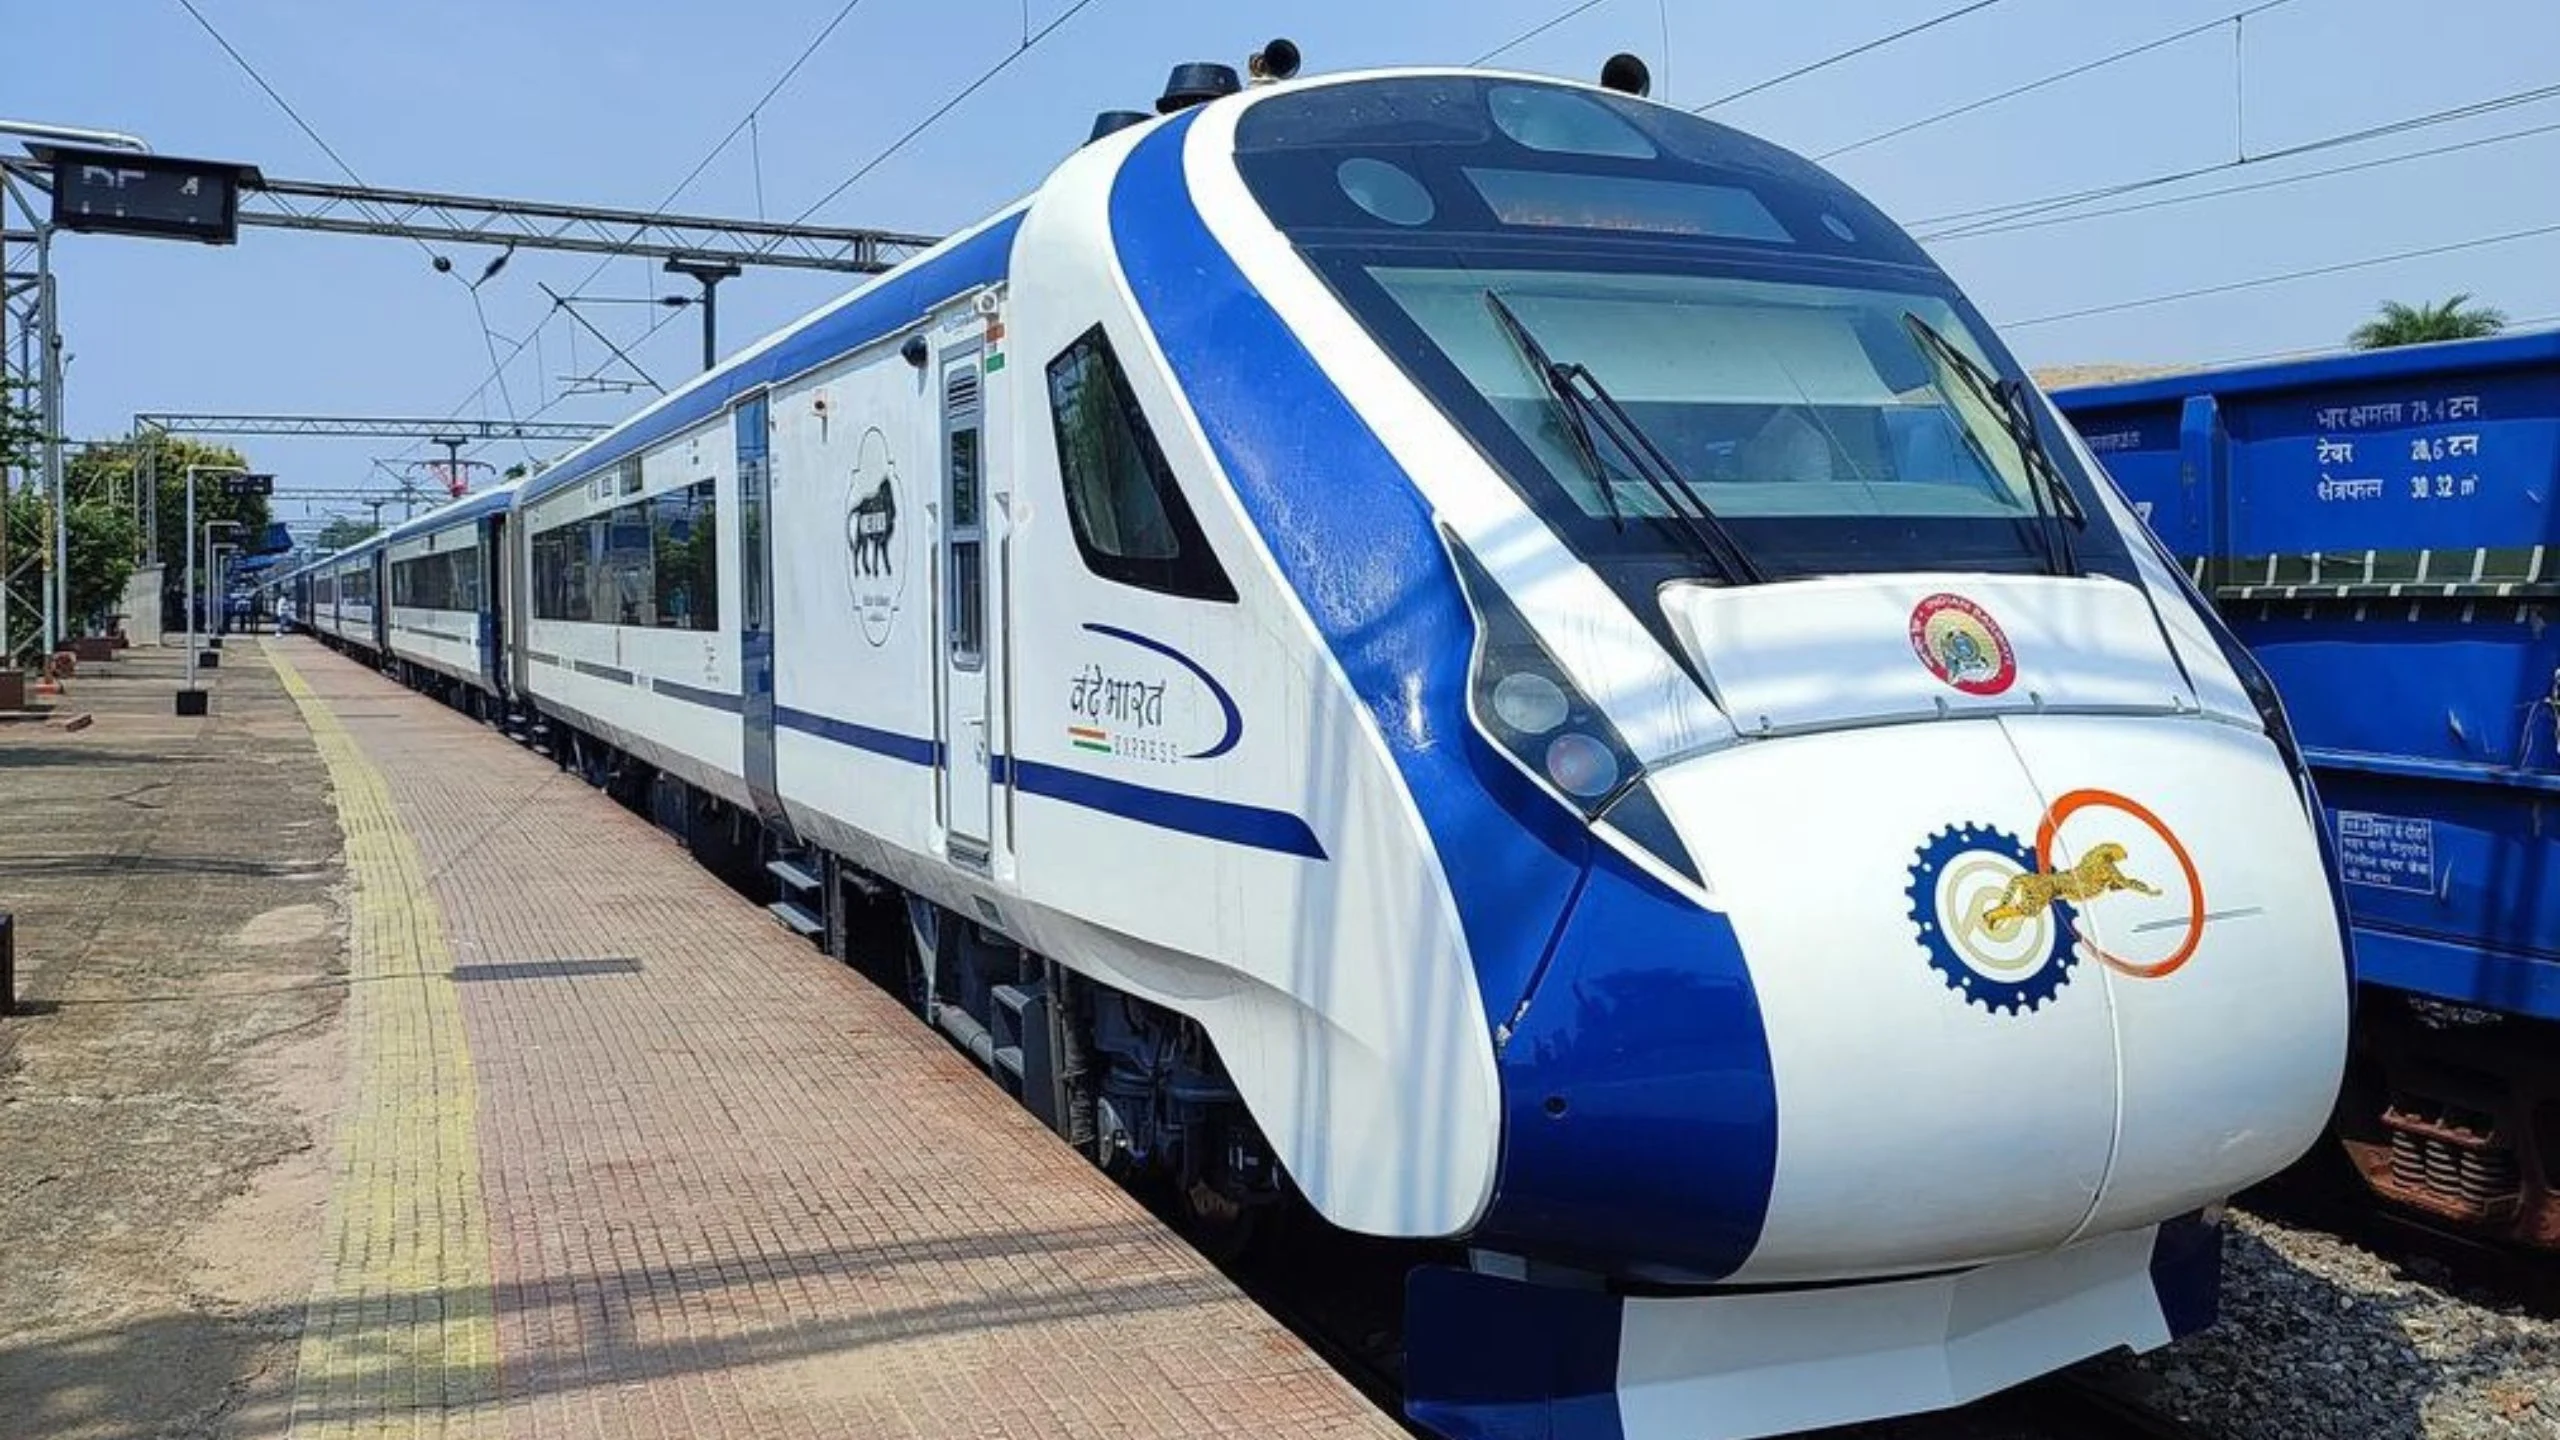 The newly launched Vande Bharat Express and the Shatabdi Express will be running at an increased speed at around 130 km per hour